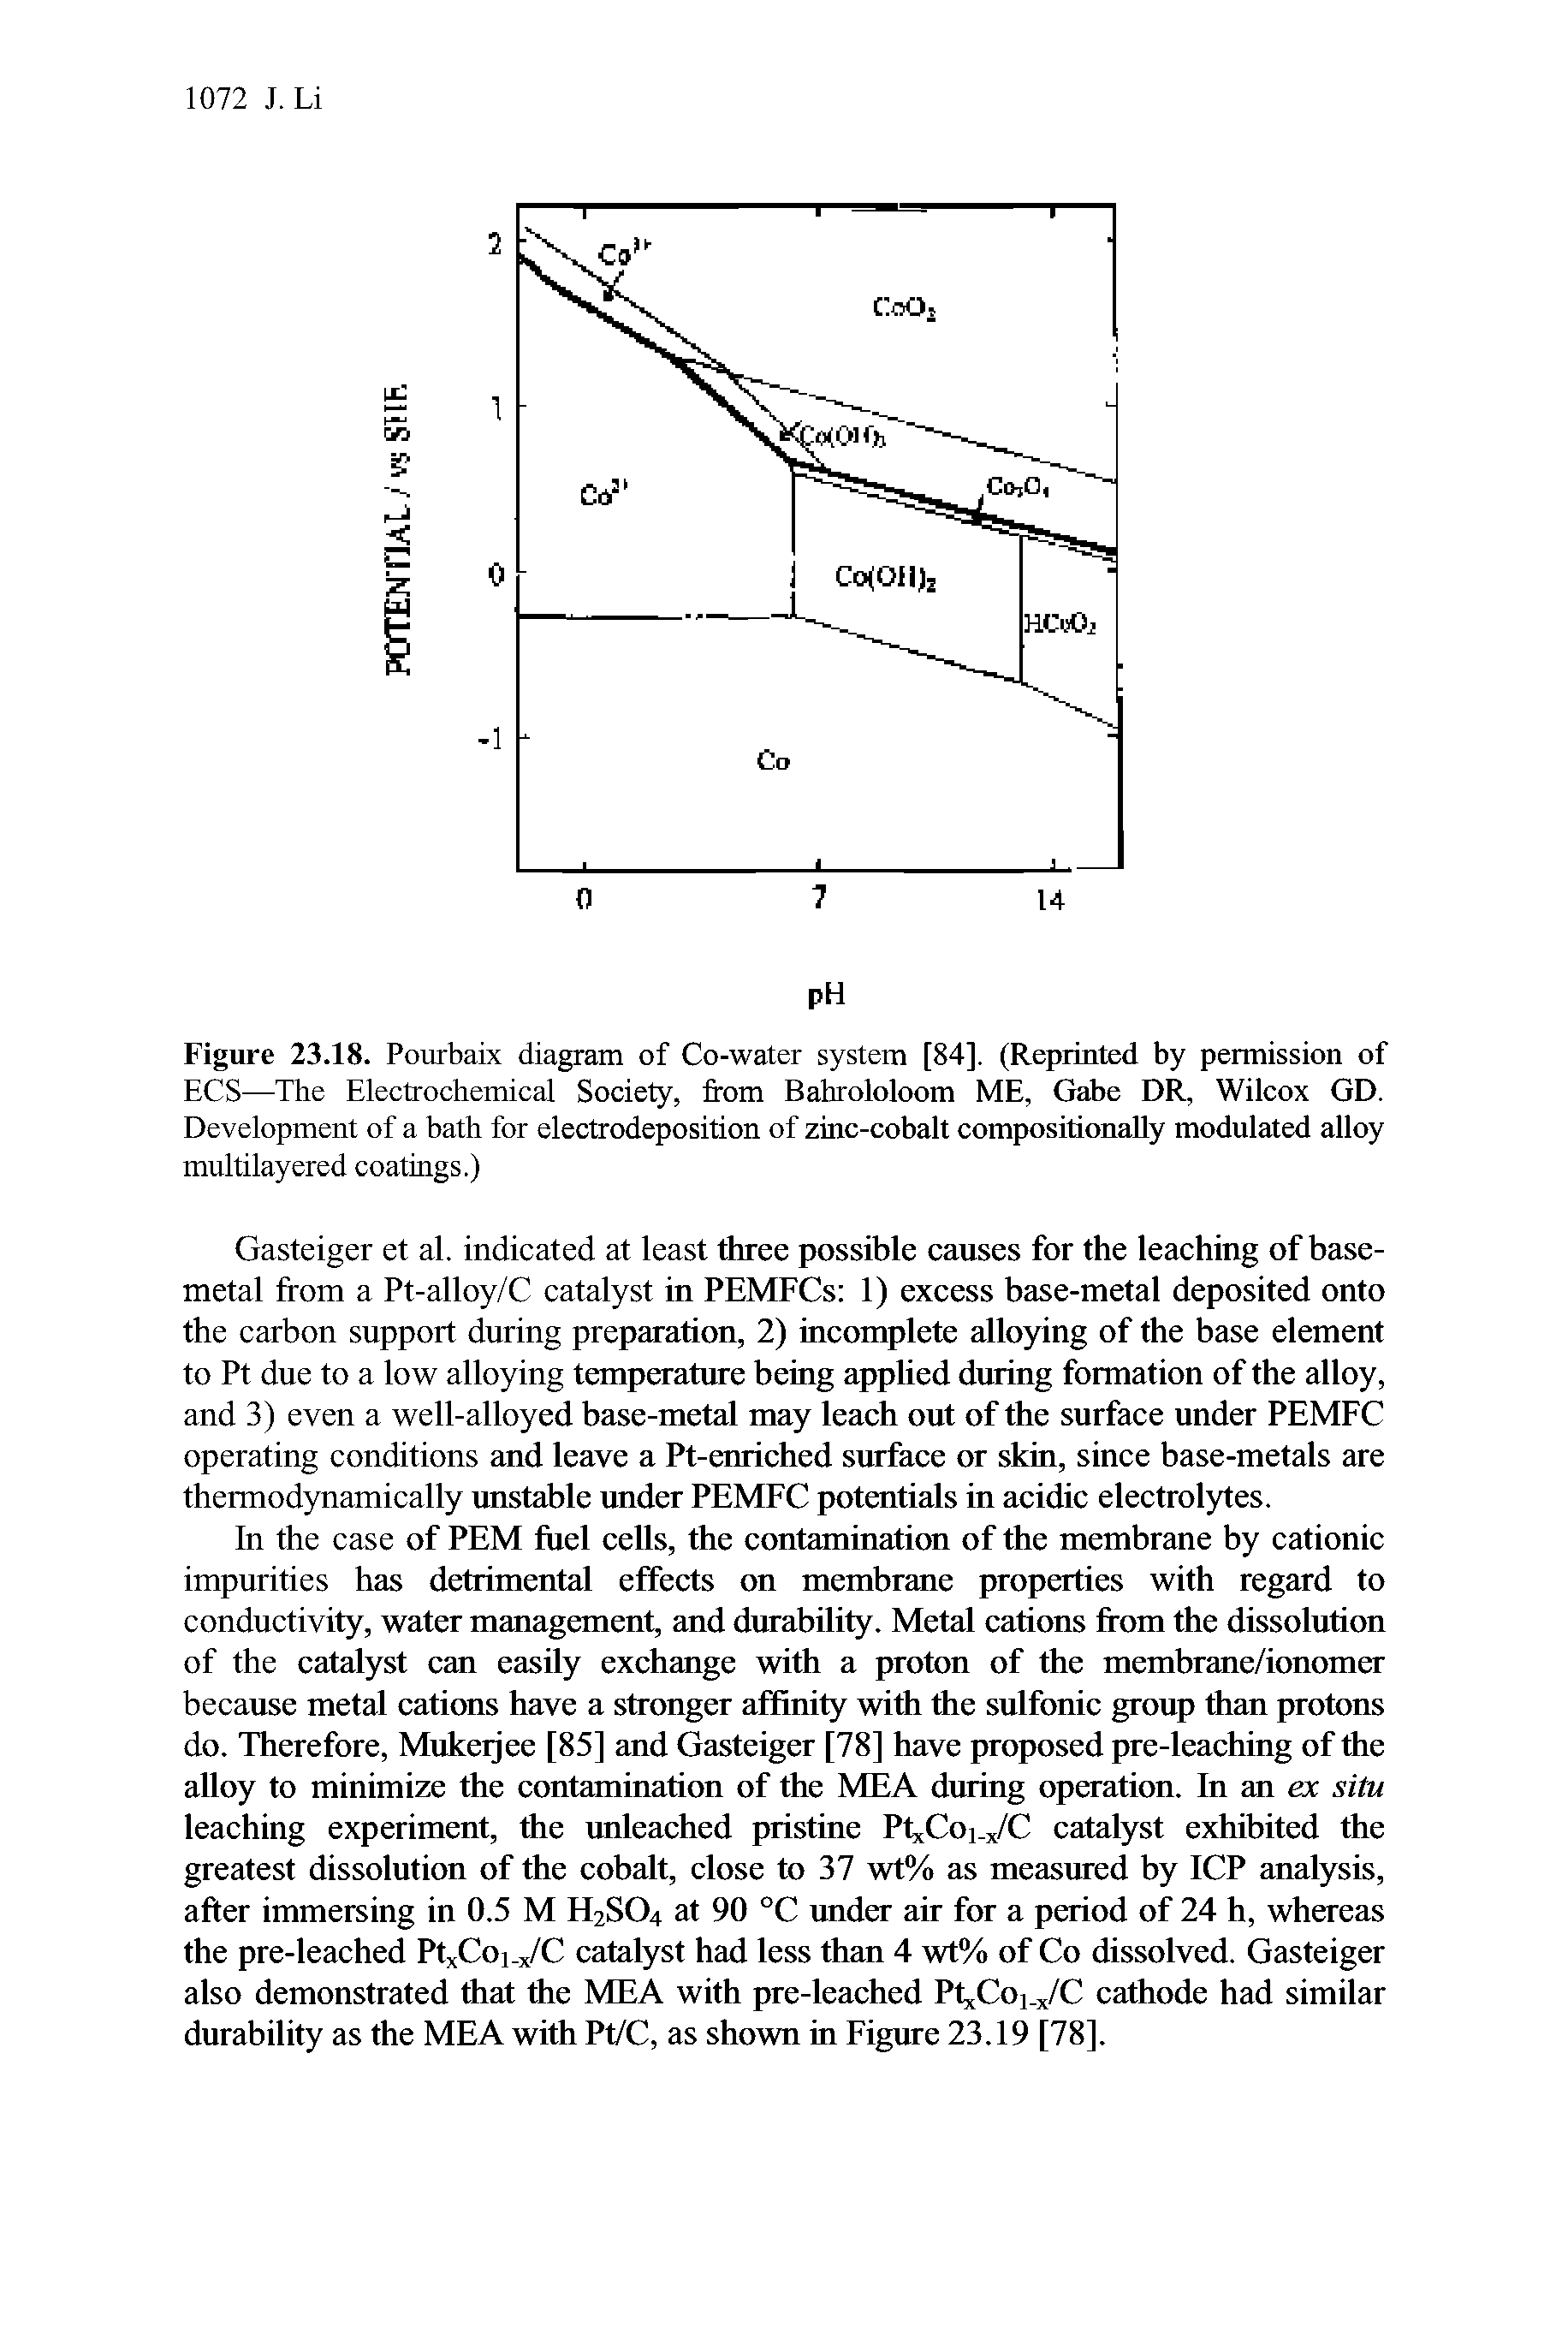 Figure 23.18. Pourbaix diagram of Co-water system [84]. (Reprinted by permission of ECS—The Electrochemical Society, from Balirololoom ME, Gabe DR, Wilcox GD. Development of a bath for electrodeposition of zinc-cobalt compositionally modulated alloy multilayered coatings.)...